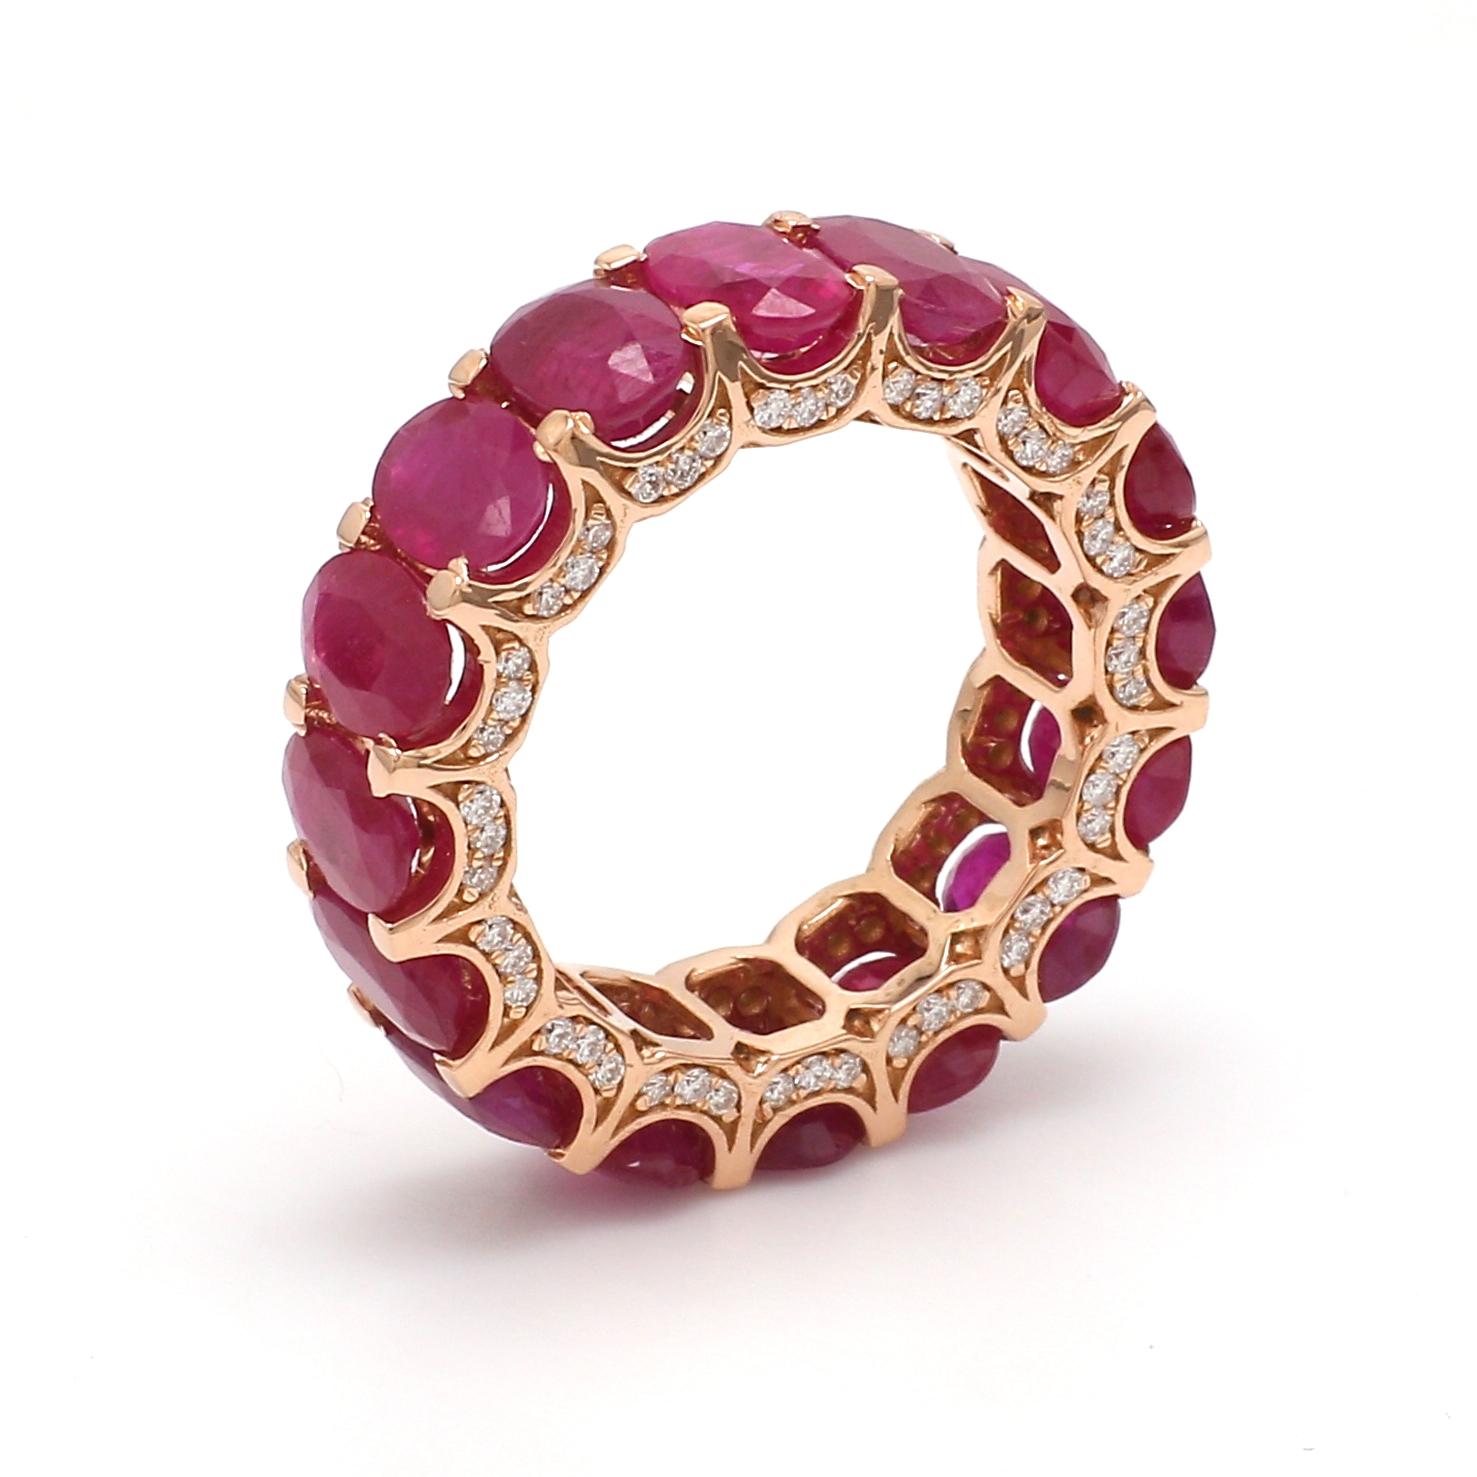 For Sale:  Natural Oval Ruby Gemstone Band Ring Diamond Pave 18k Rose Gold Fine Jewelry 2